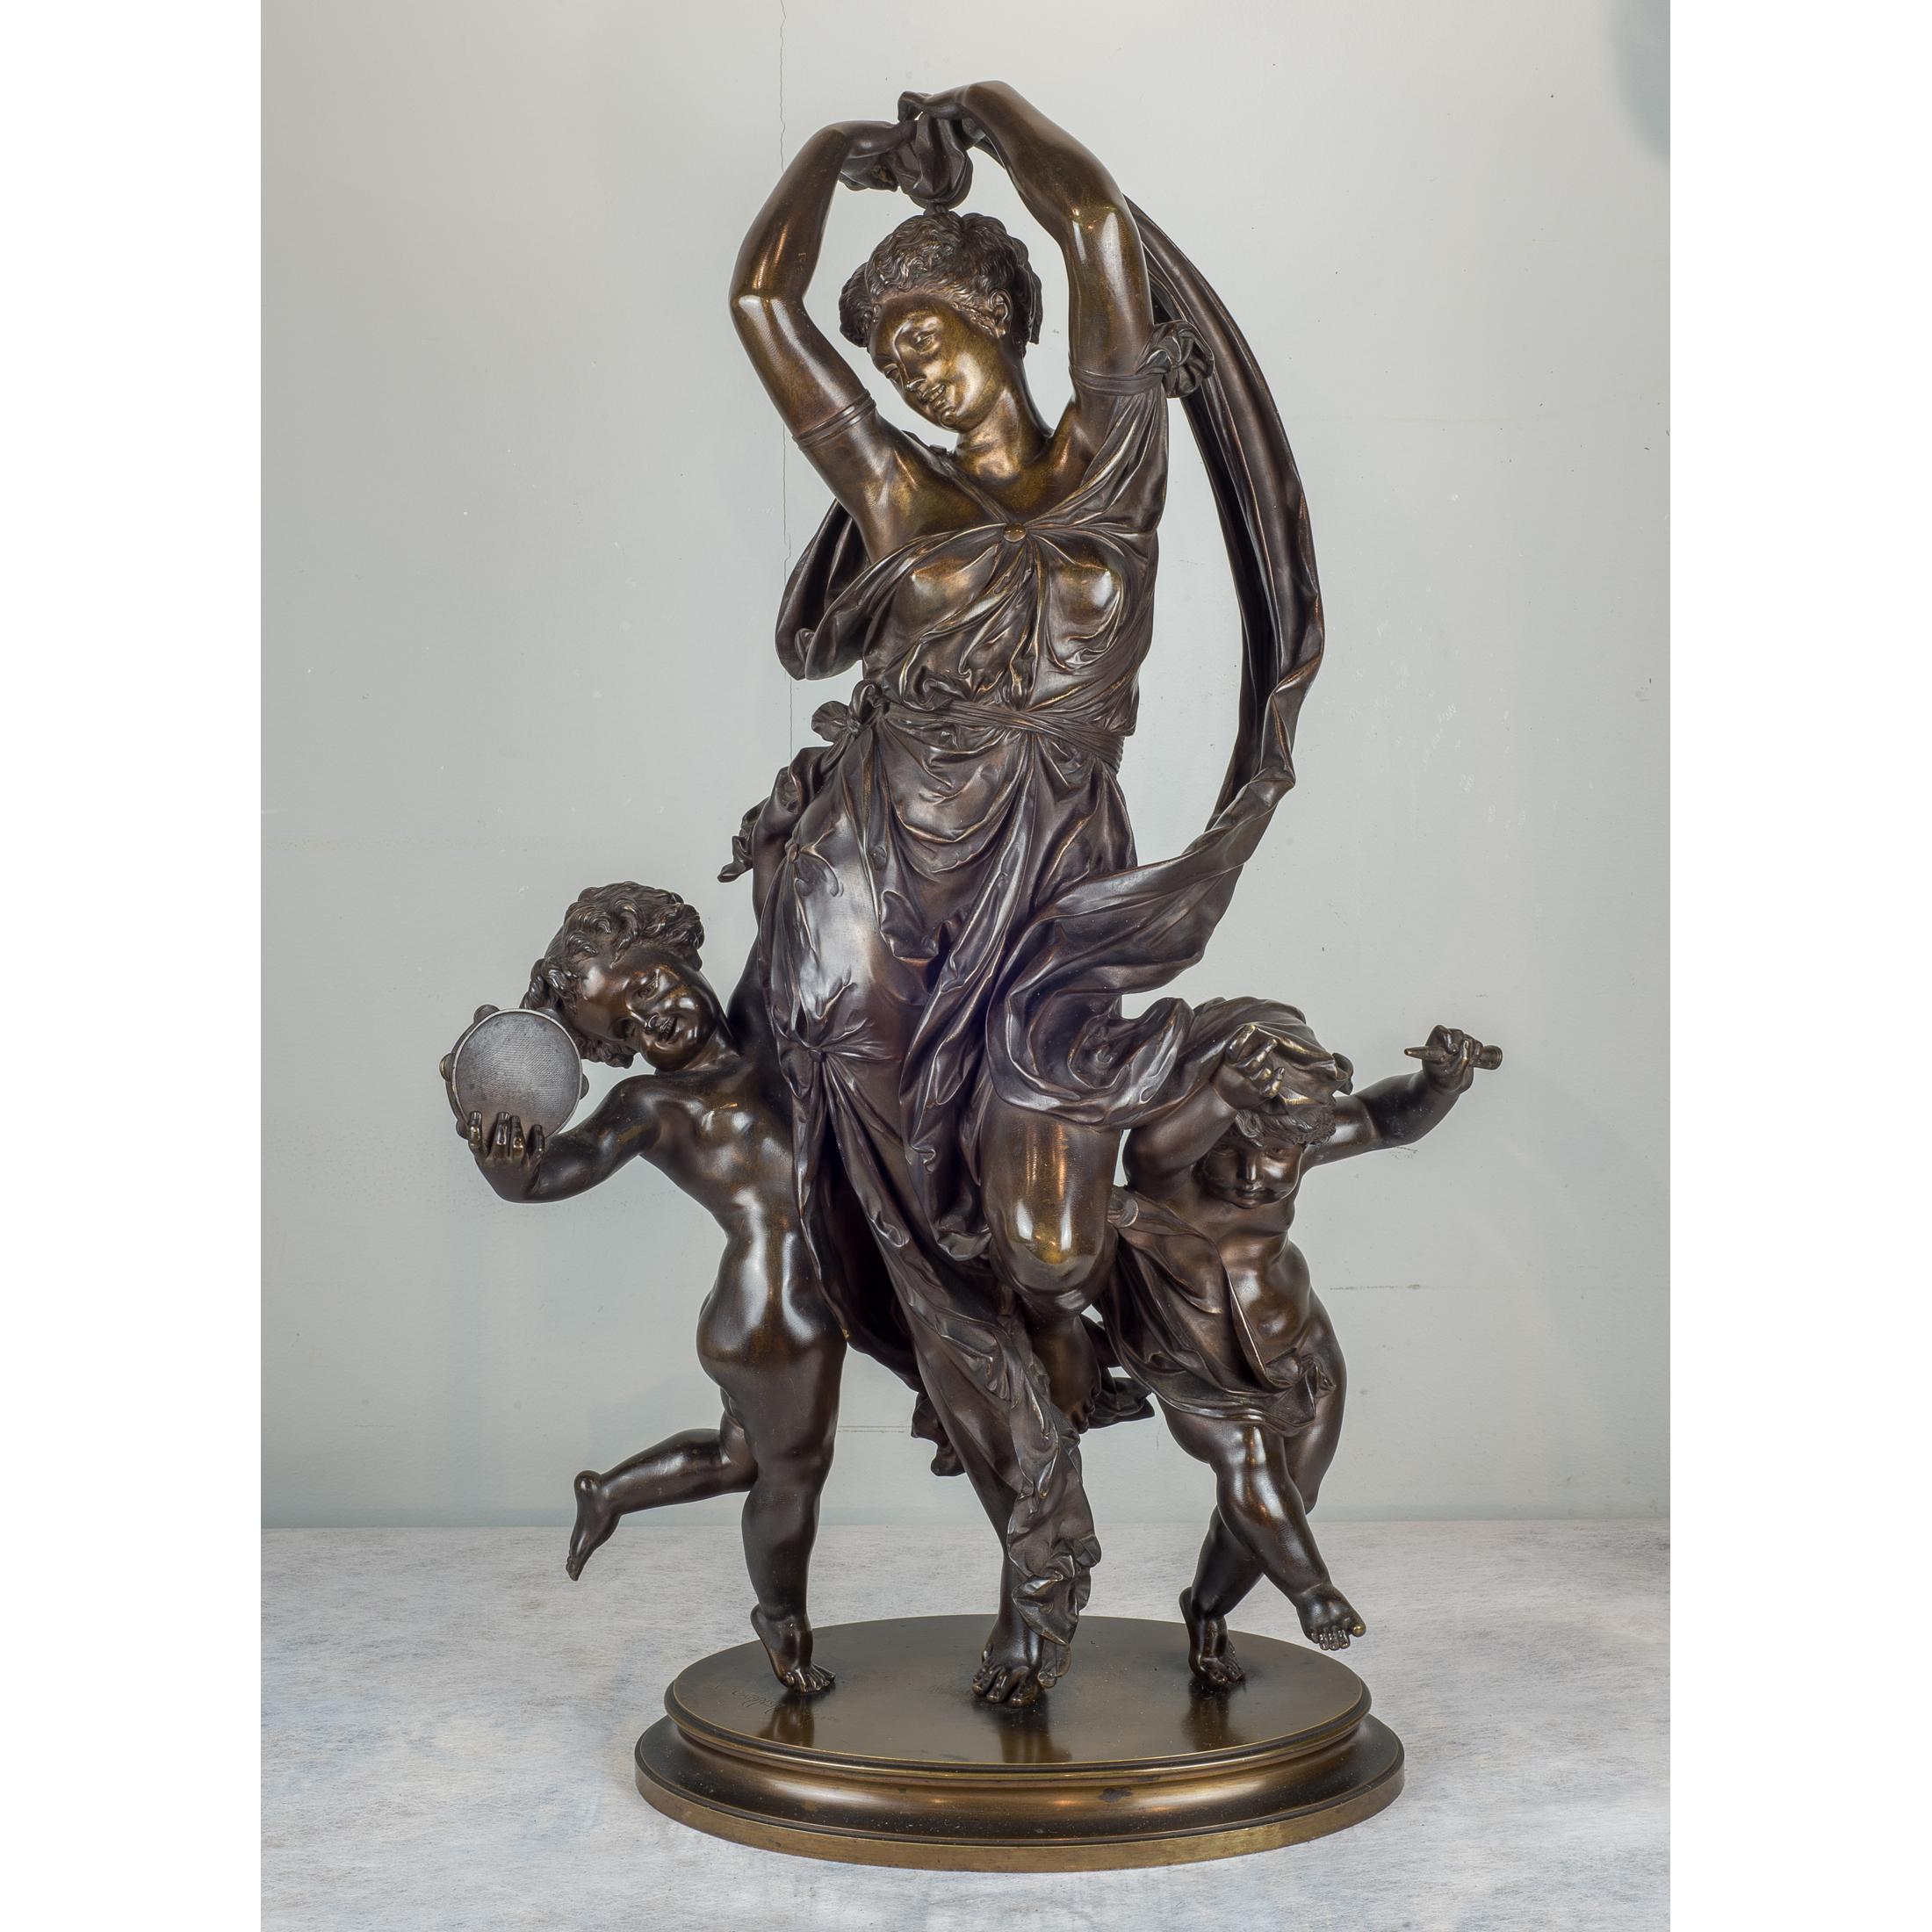 A Fine Quality Patinated Bronze Group of Maenad and Cherubs Dancing - Sculpture by Auguste Joseph Carrier